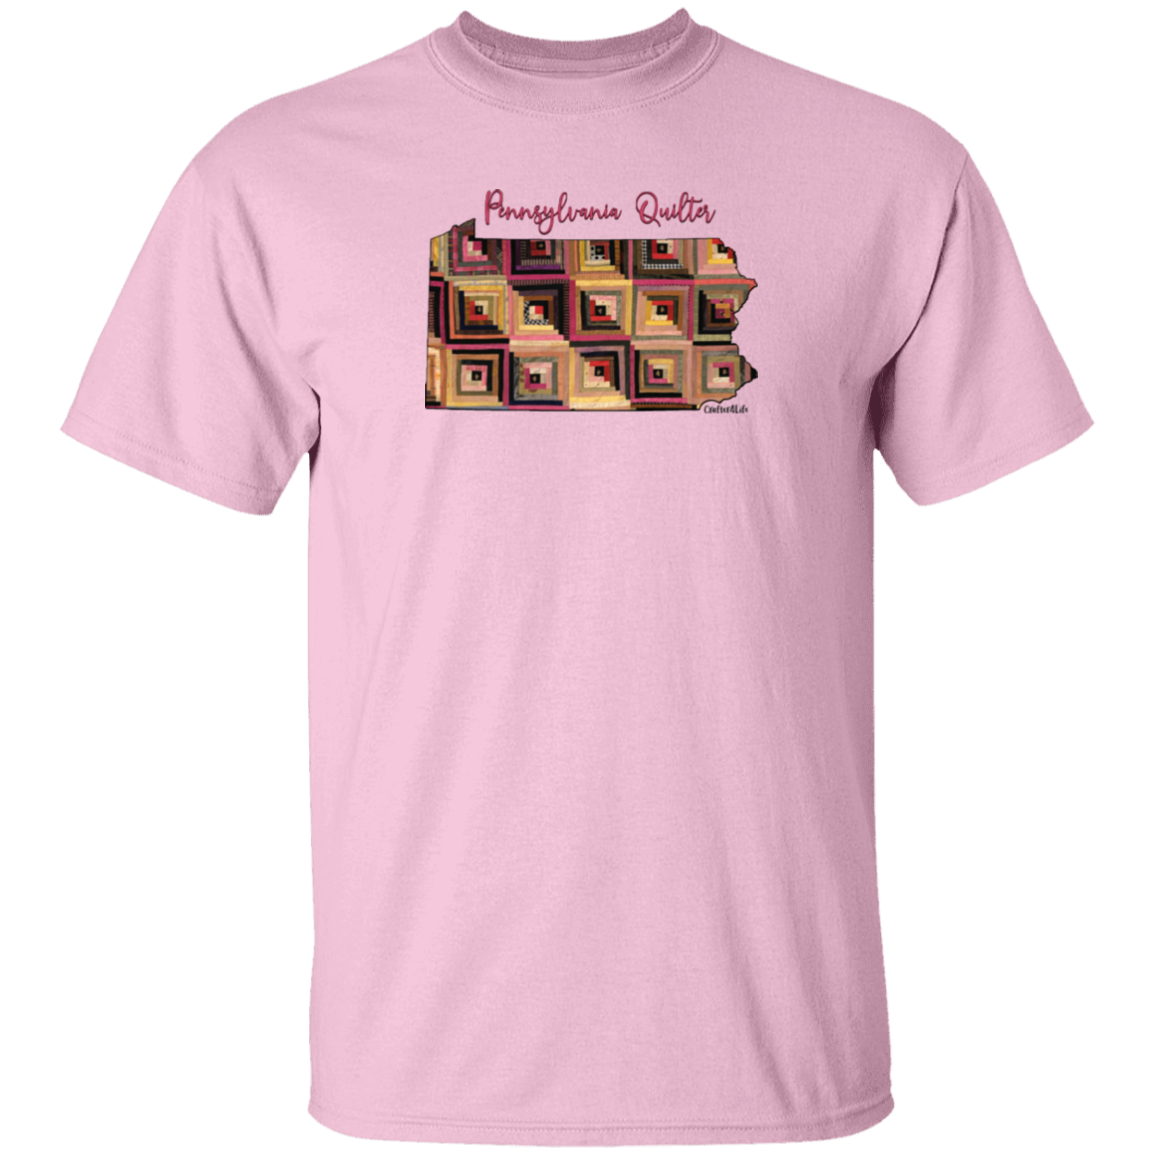 Pennsylvania Quilter T-Shirt, Gift for Quilting Friends and Family